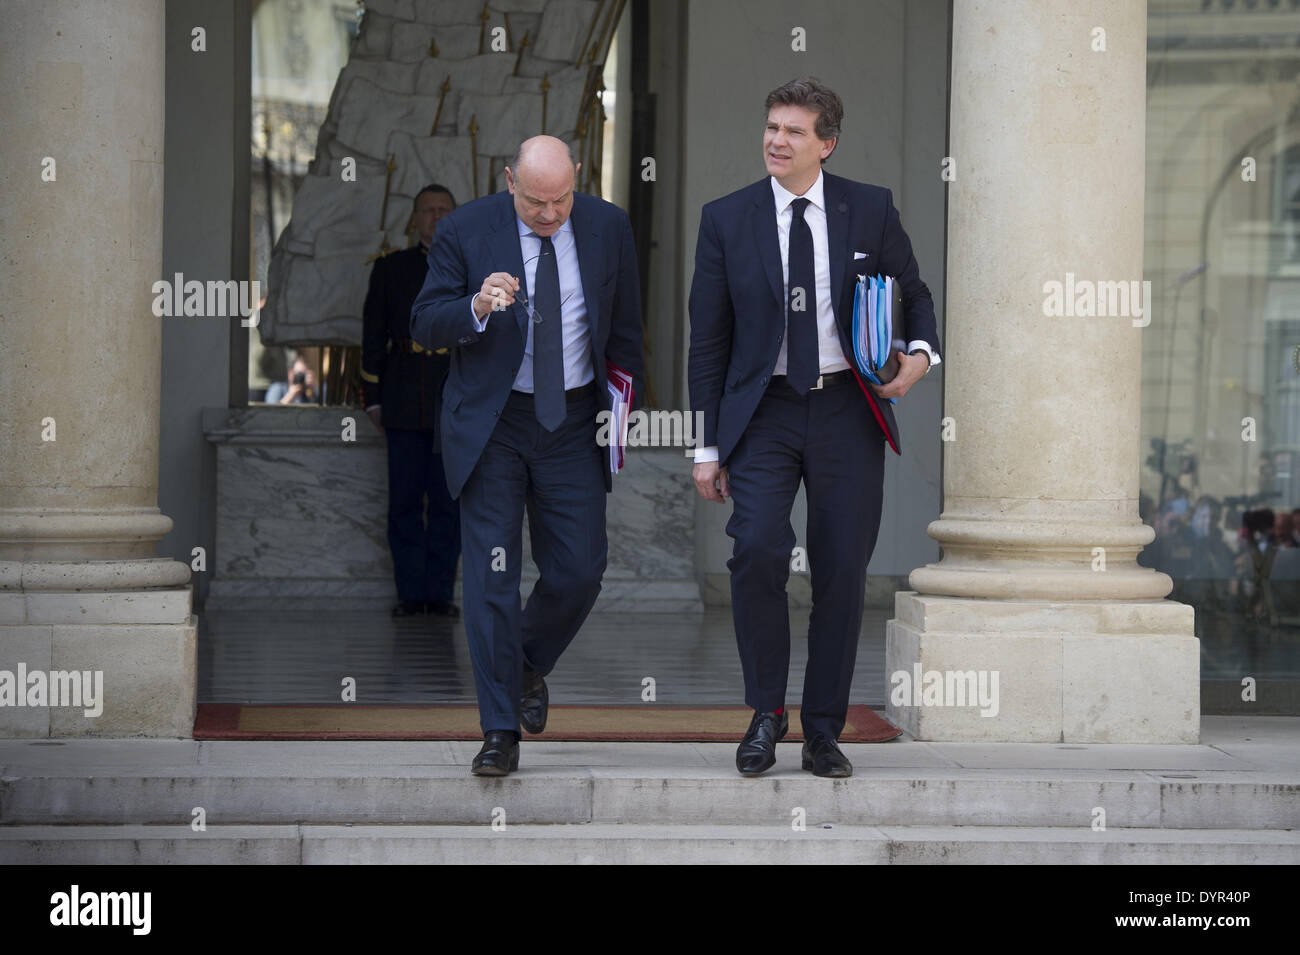 Paris, FRA. 23rd Apr, 2014. French Economy Minister Arnaud Montebourg (R) greets as he leaves the Elysee Palace in Paris with French Junior Minister for Relations with Parliament Jean-Marie Le Guen (L) leave the Elysee palace on April 23, 2014, in Paris, after the weekly cabinet meeting. (Photo/Zacharie Scheurer) © Zacharie Scheurer/NurPhoto/ZUMAPRESS.com/Alamy Live News Stock Photo